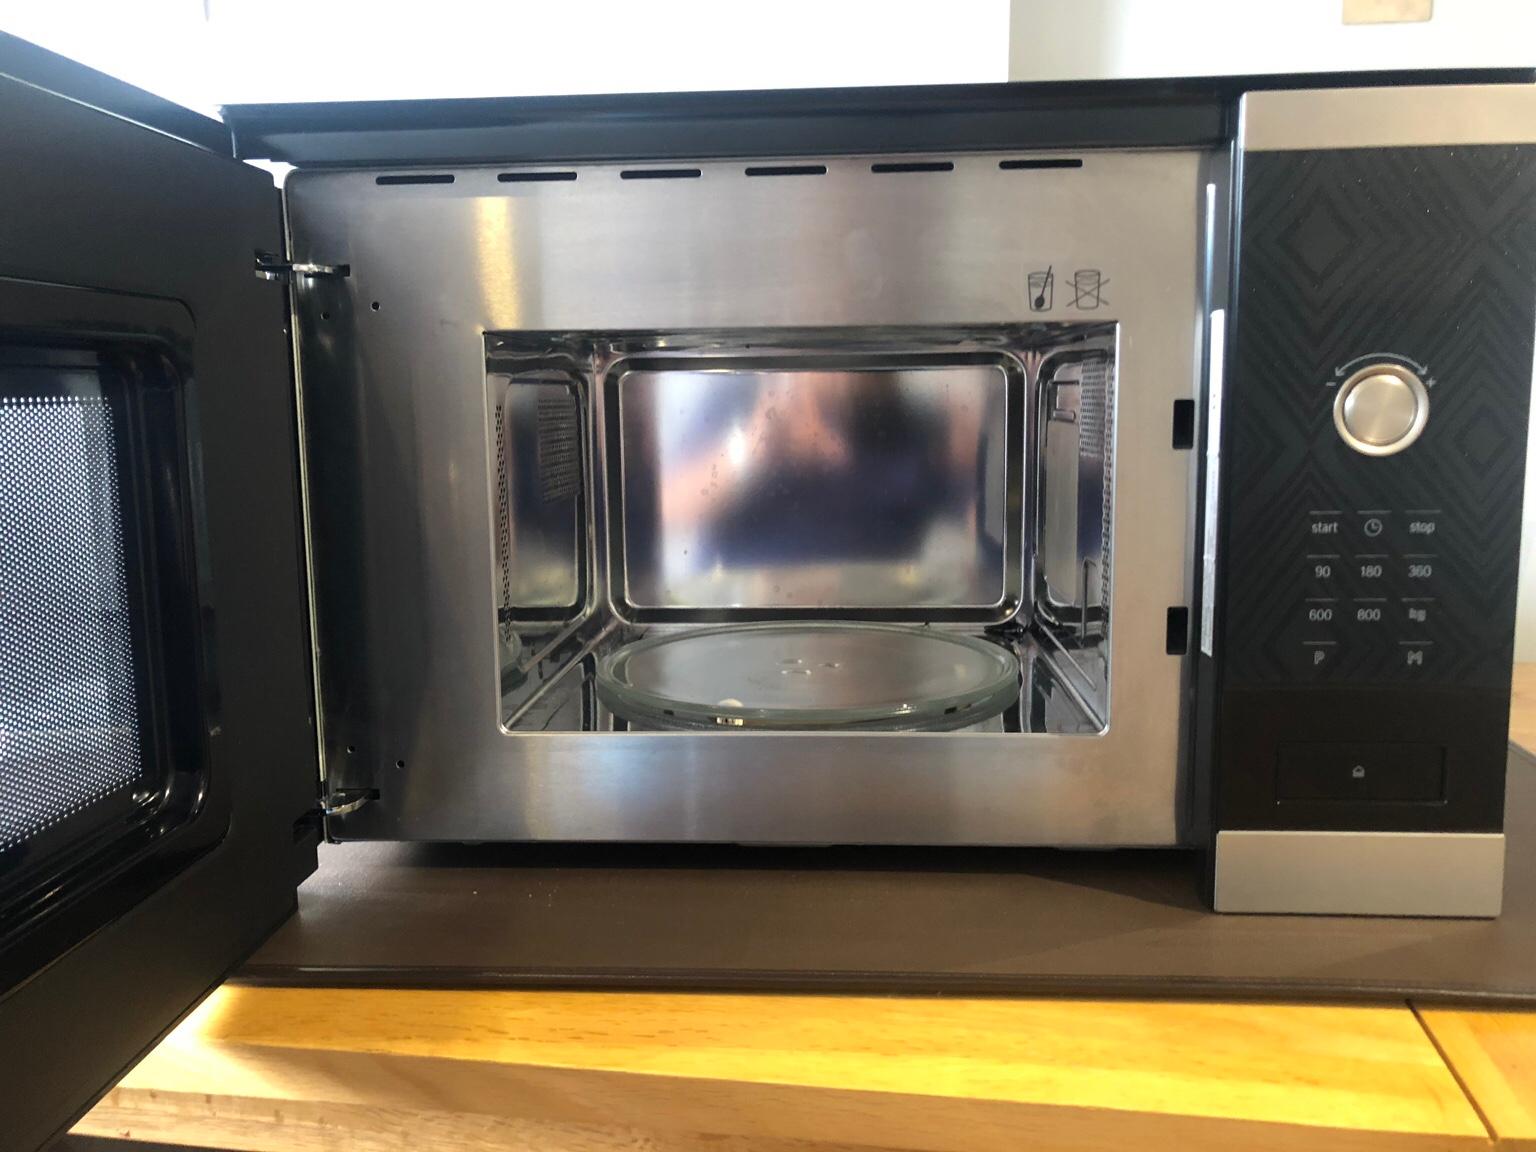 Bosch Integrated Microwave Ex Condition in London for £150.00 for sale